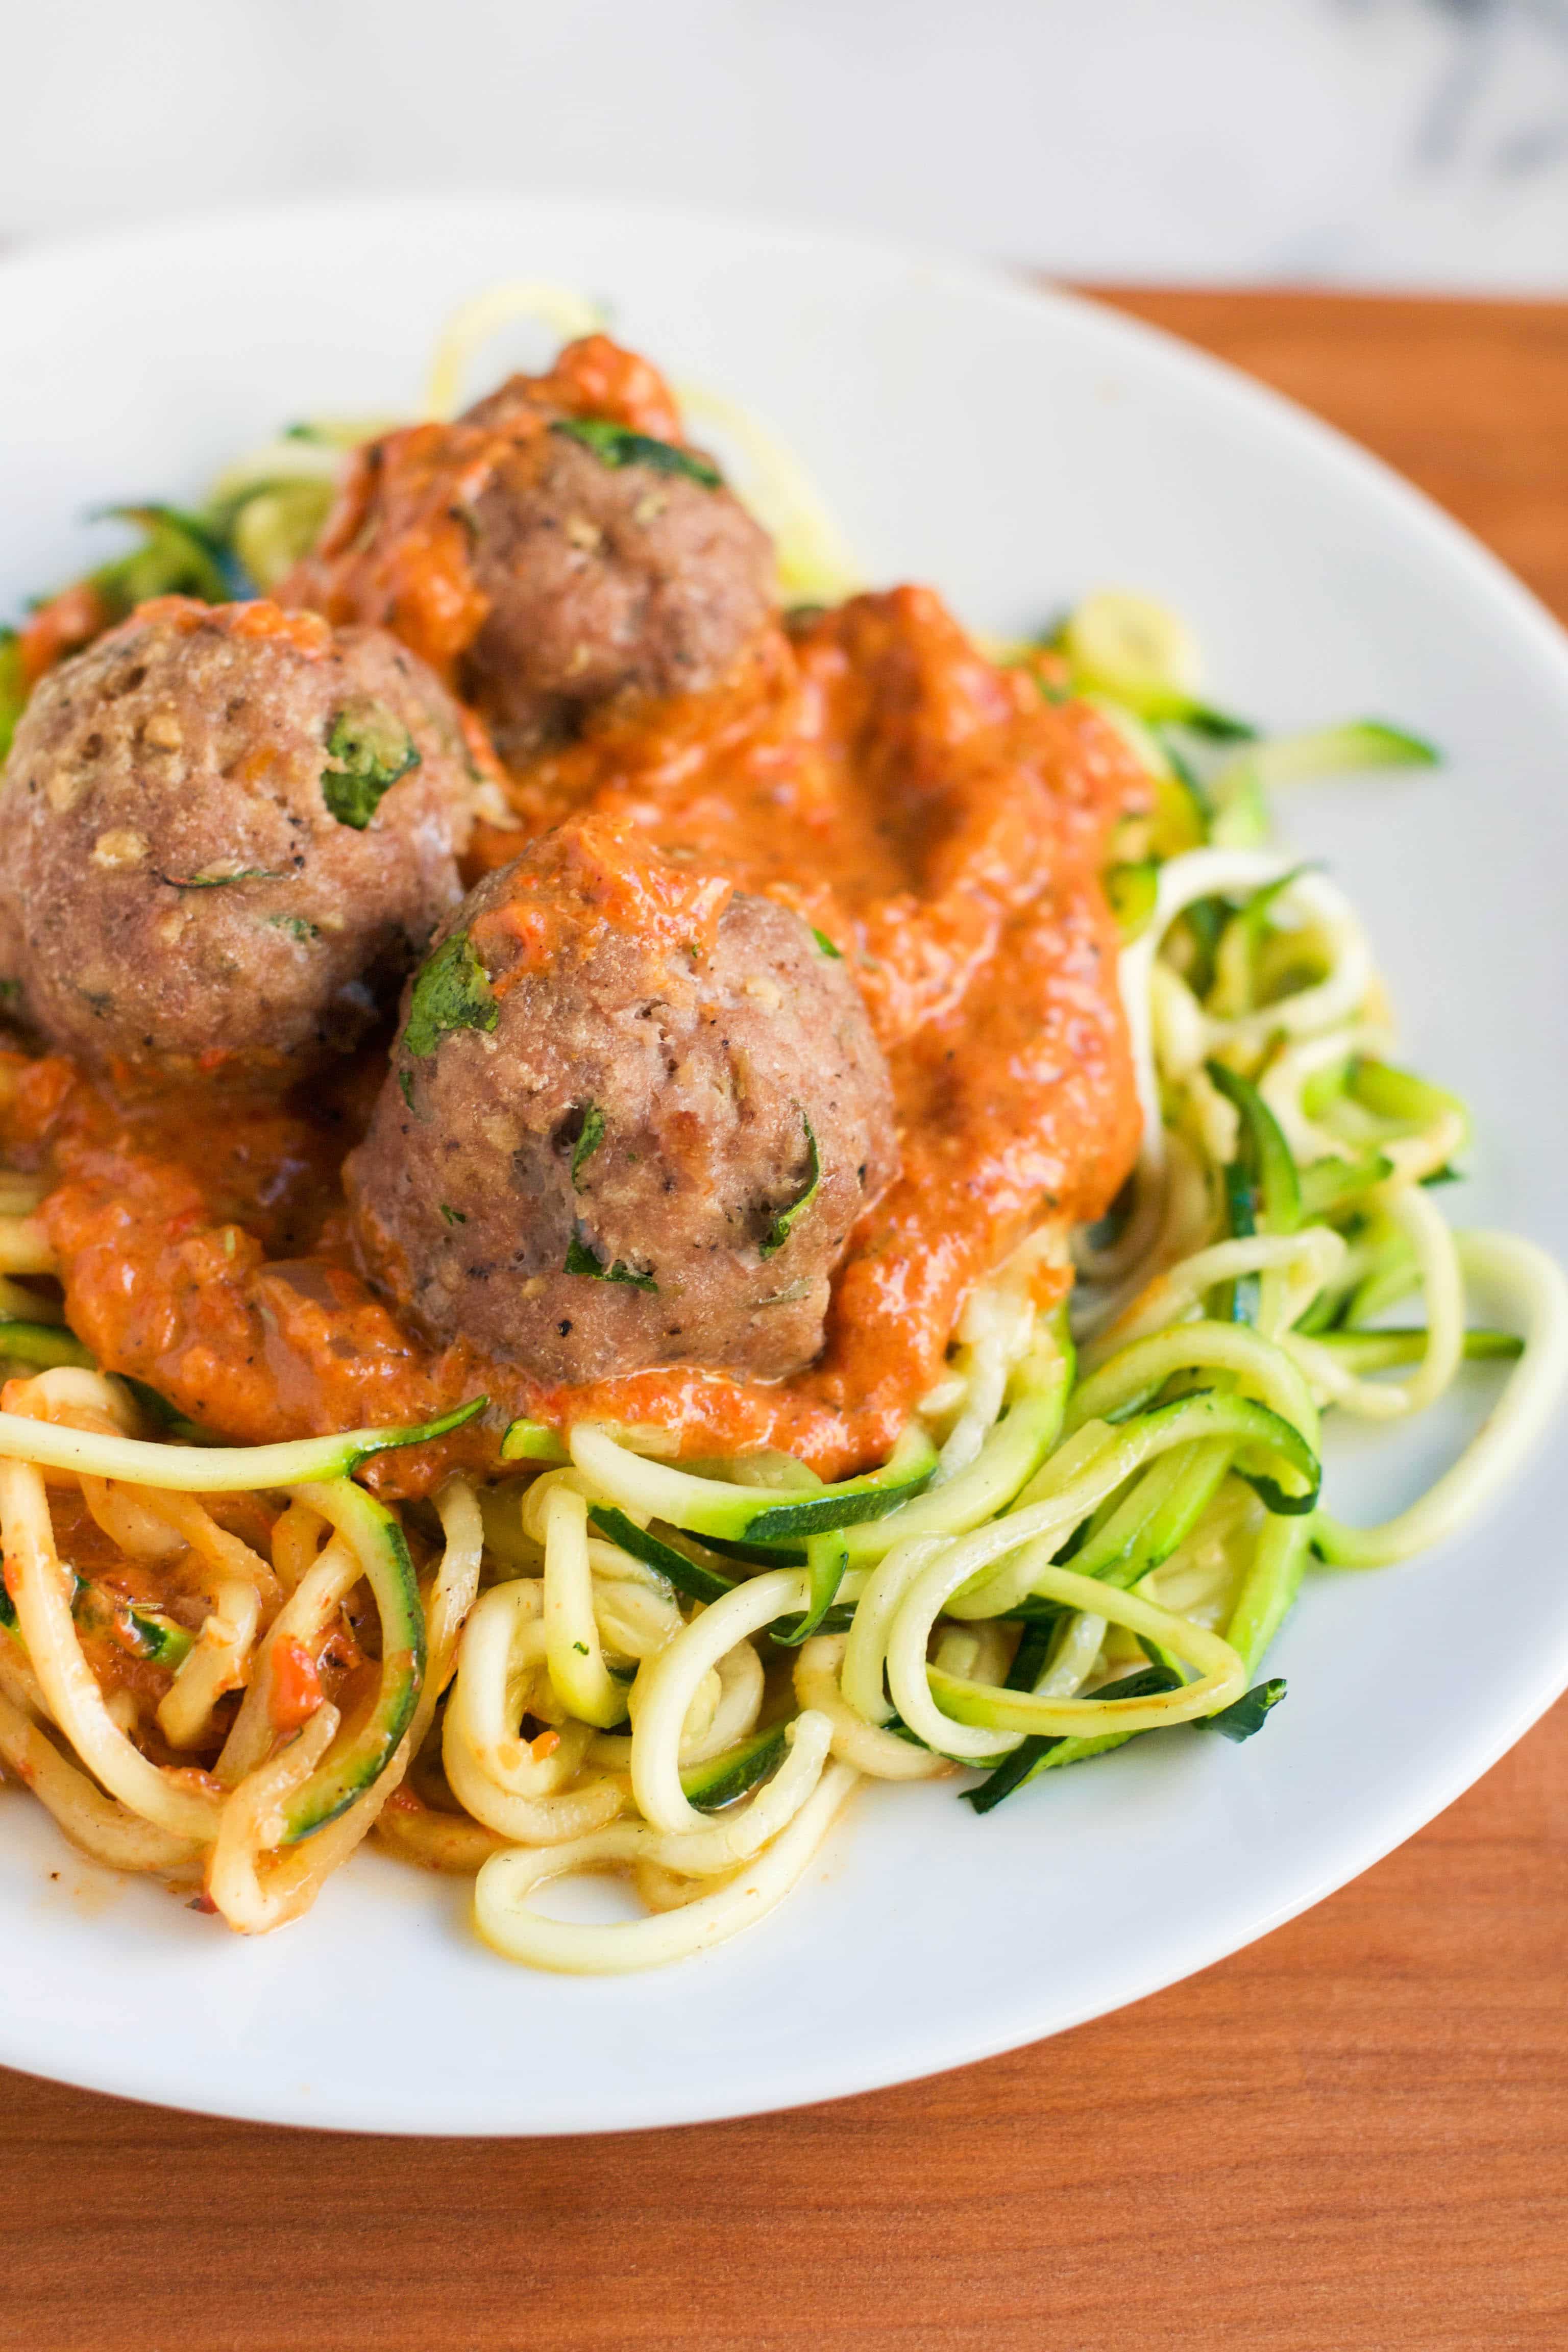 Zoodles with Turkey Meatballs in a Roasted Red Pepper Sauce (GF, DF) - A Dash of Megnut